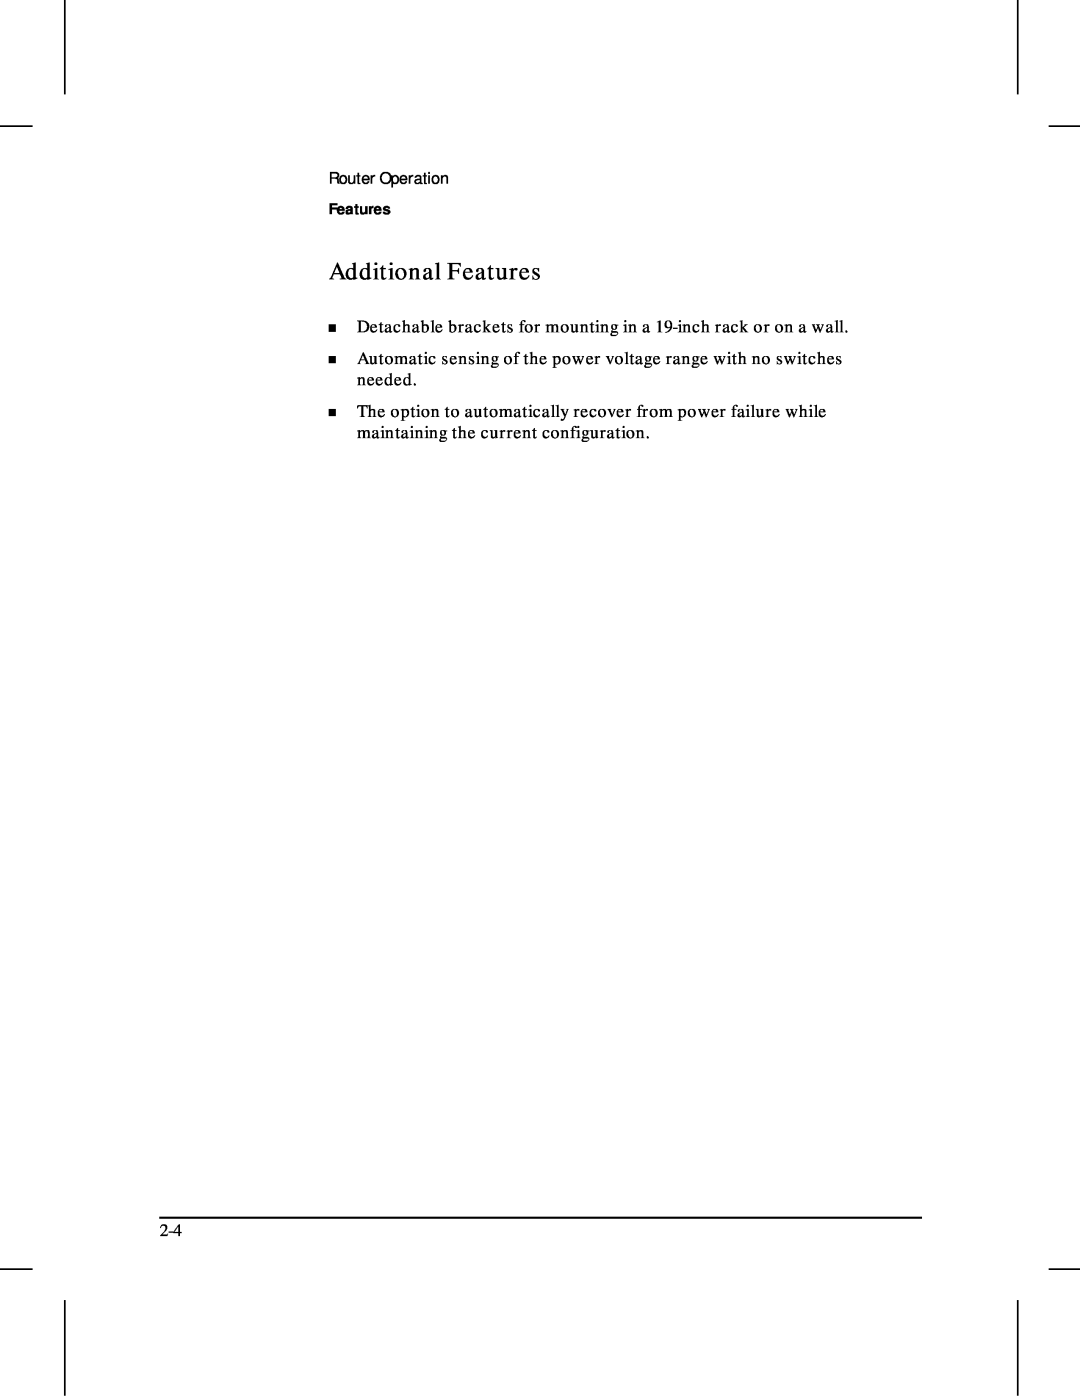 HP 480 manual Additional Features, Router Operation 